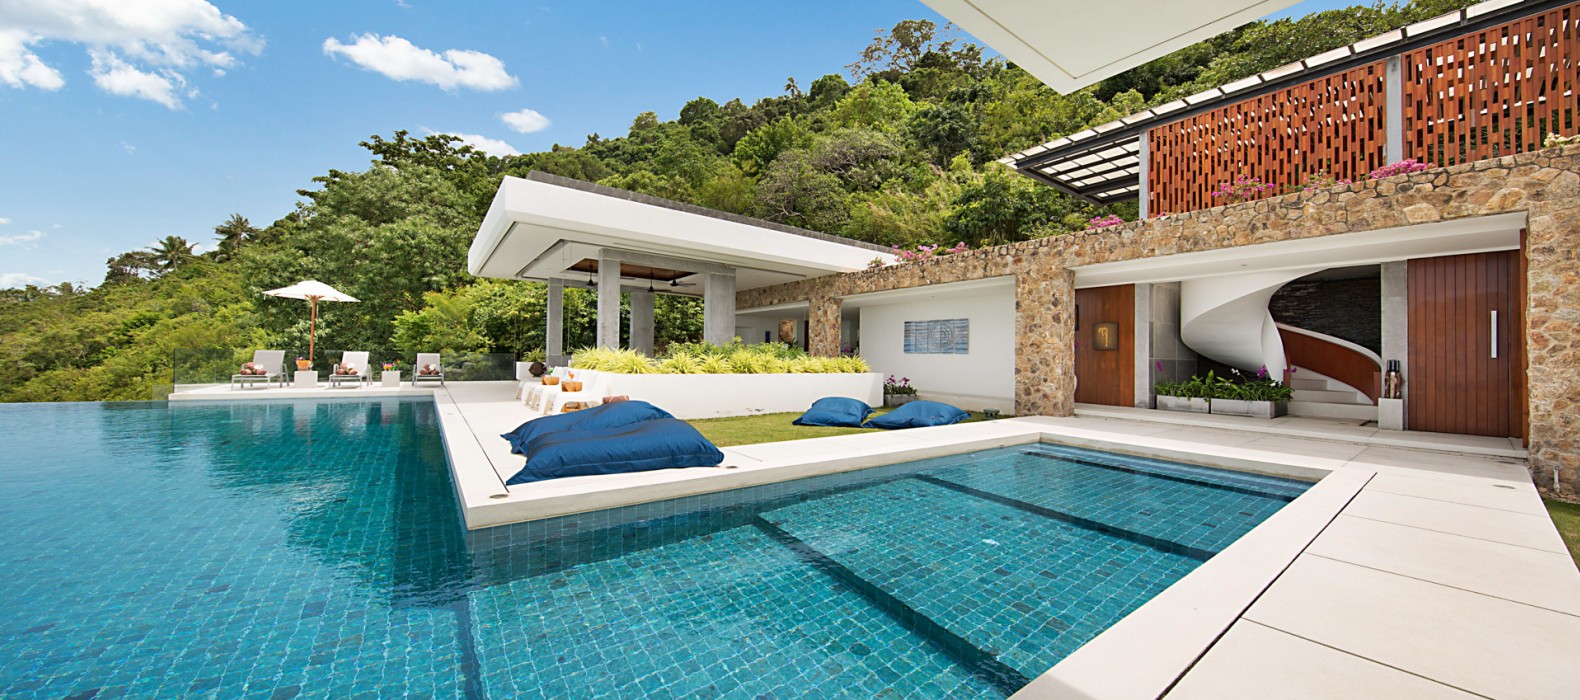 Exterior pool area of Villa Palace of Thailand in Koh Samui